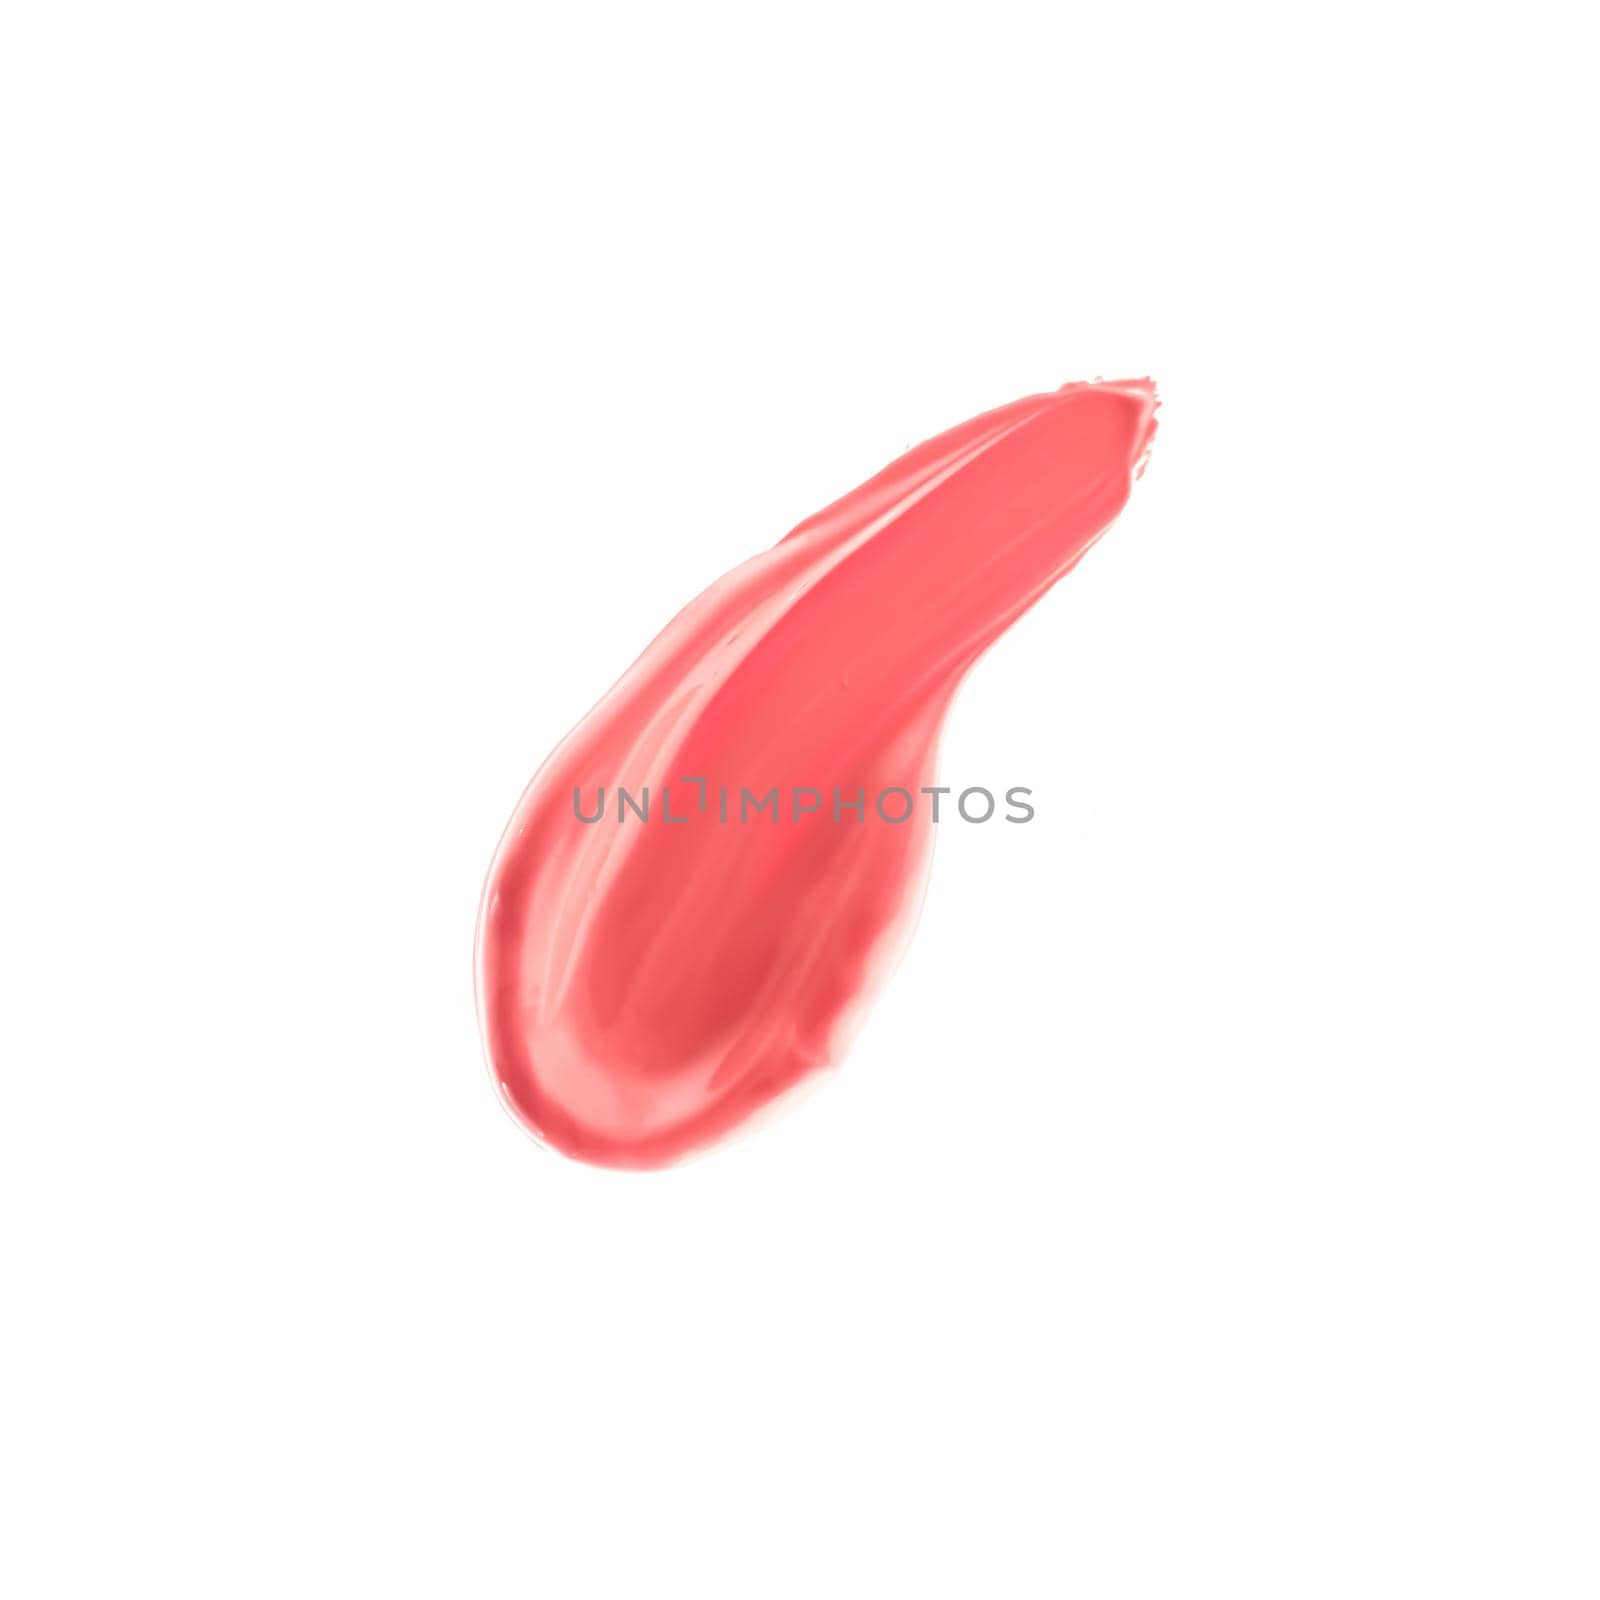 Pastel coral beauty swatch, skincare and makeup cosmetic product sample texture isolated on white background, make-up smudge, cream cosmetics smear or paint brush stroke closeup